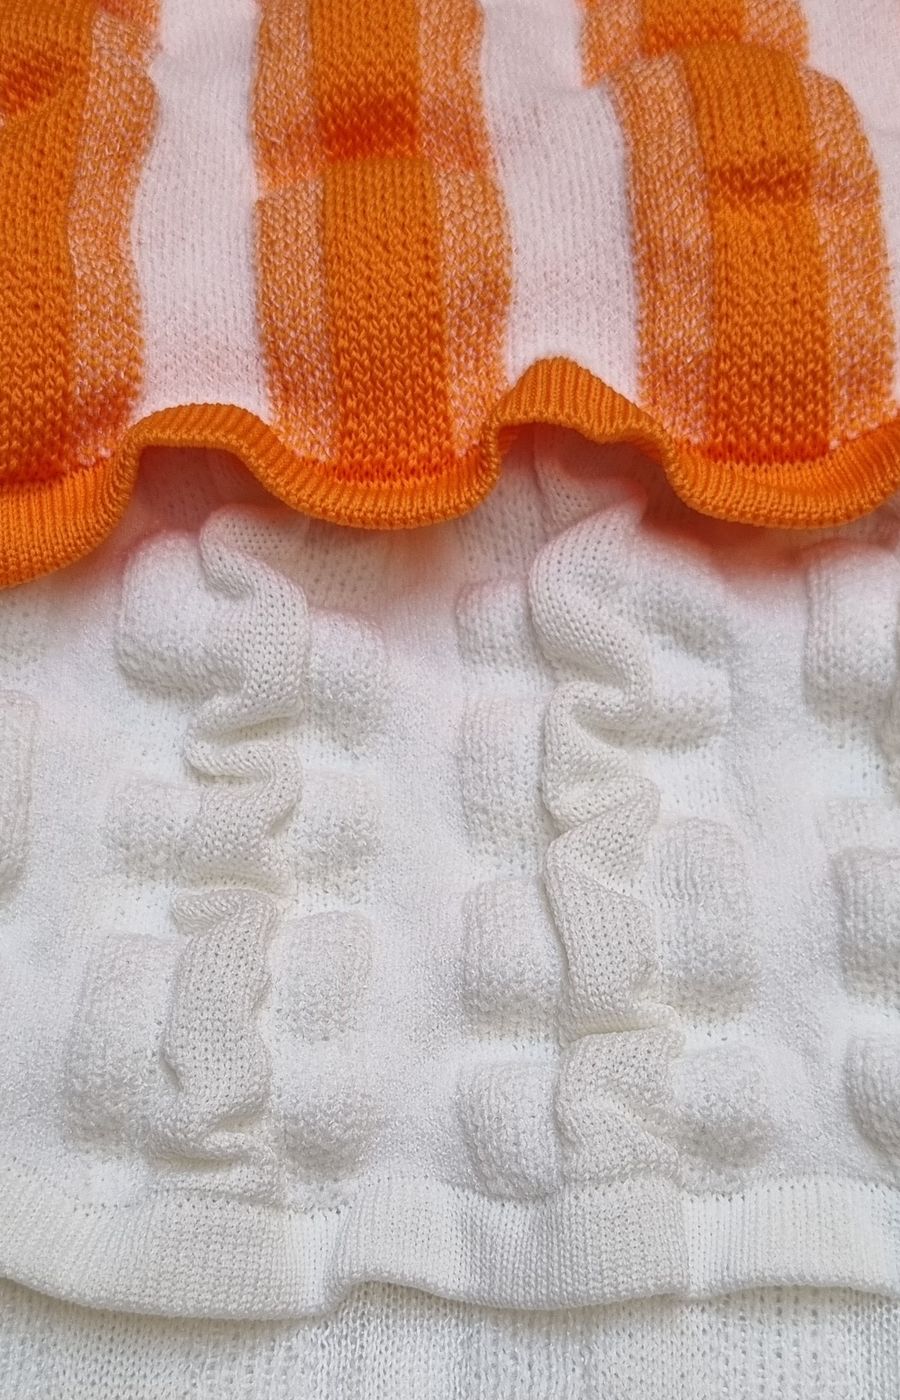 Speculative textiles for sustainability. Photo by 